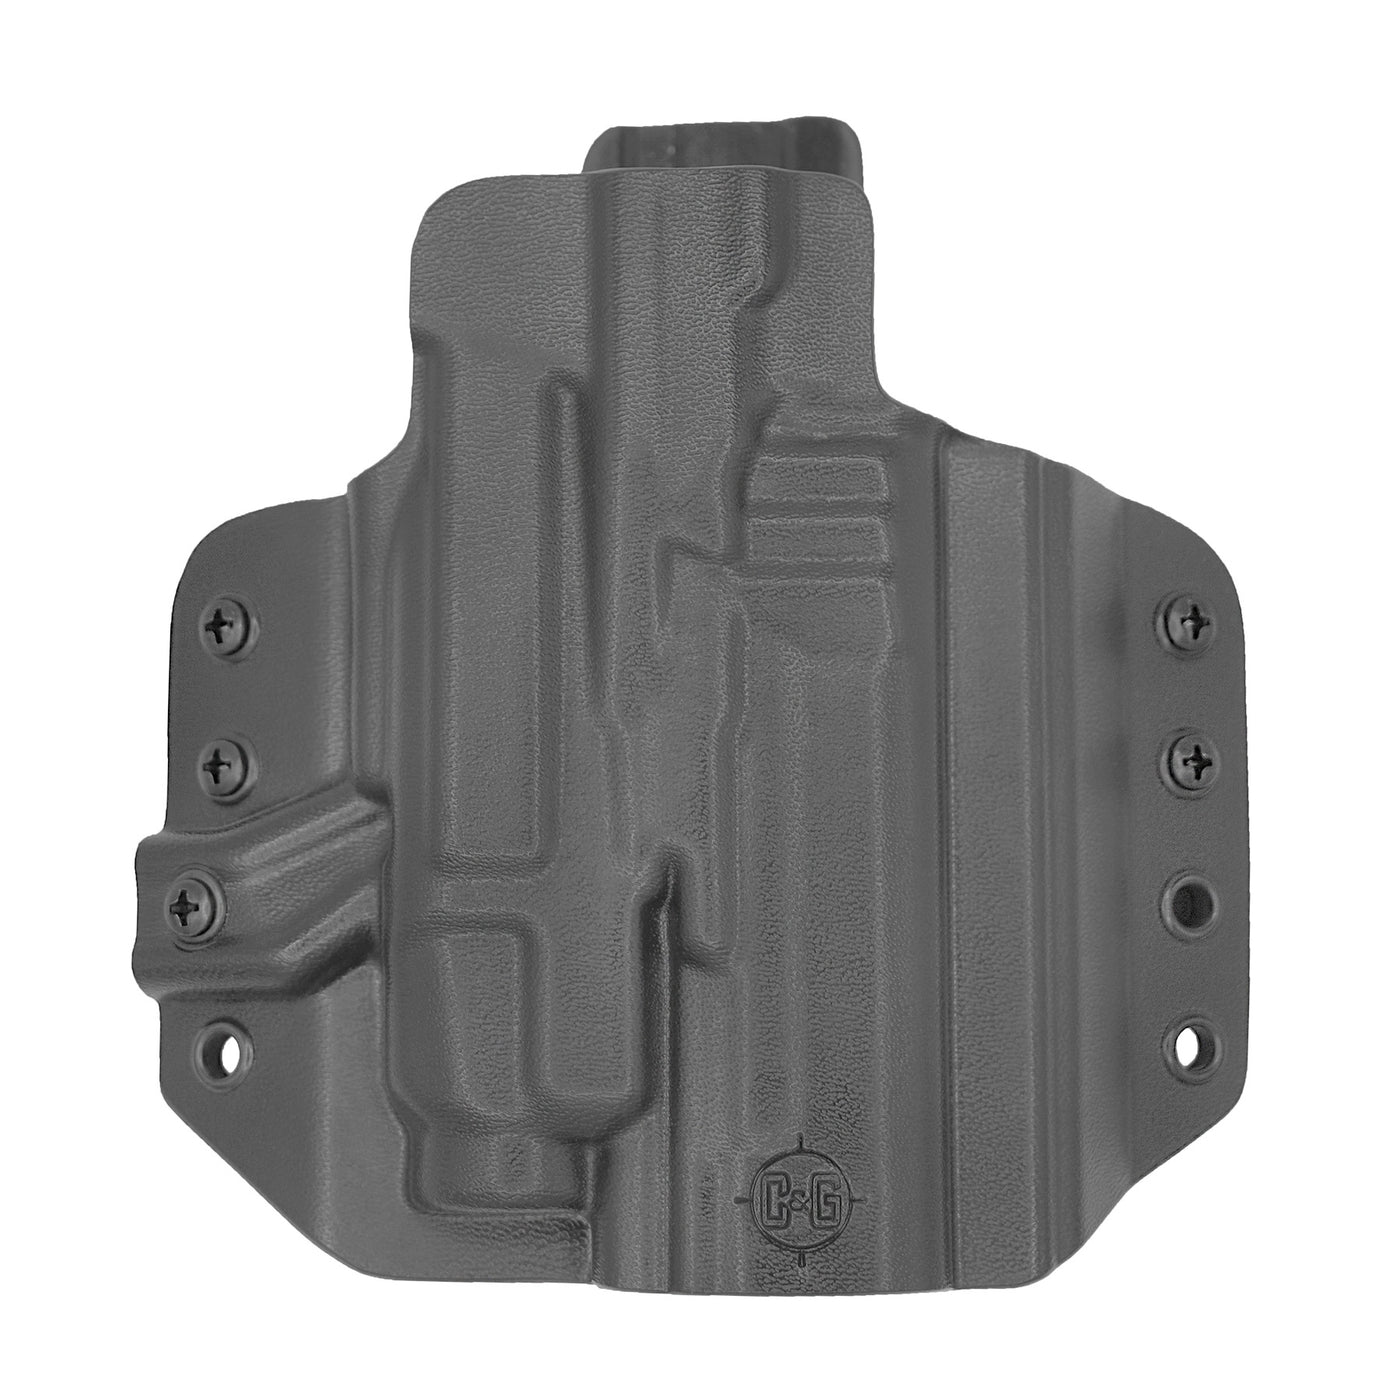 C&G Holsters custom OWB Tactical CZ P07/09 Streamlight TLR7/a